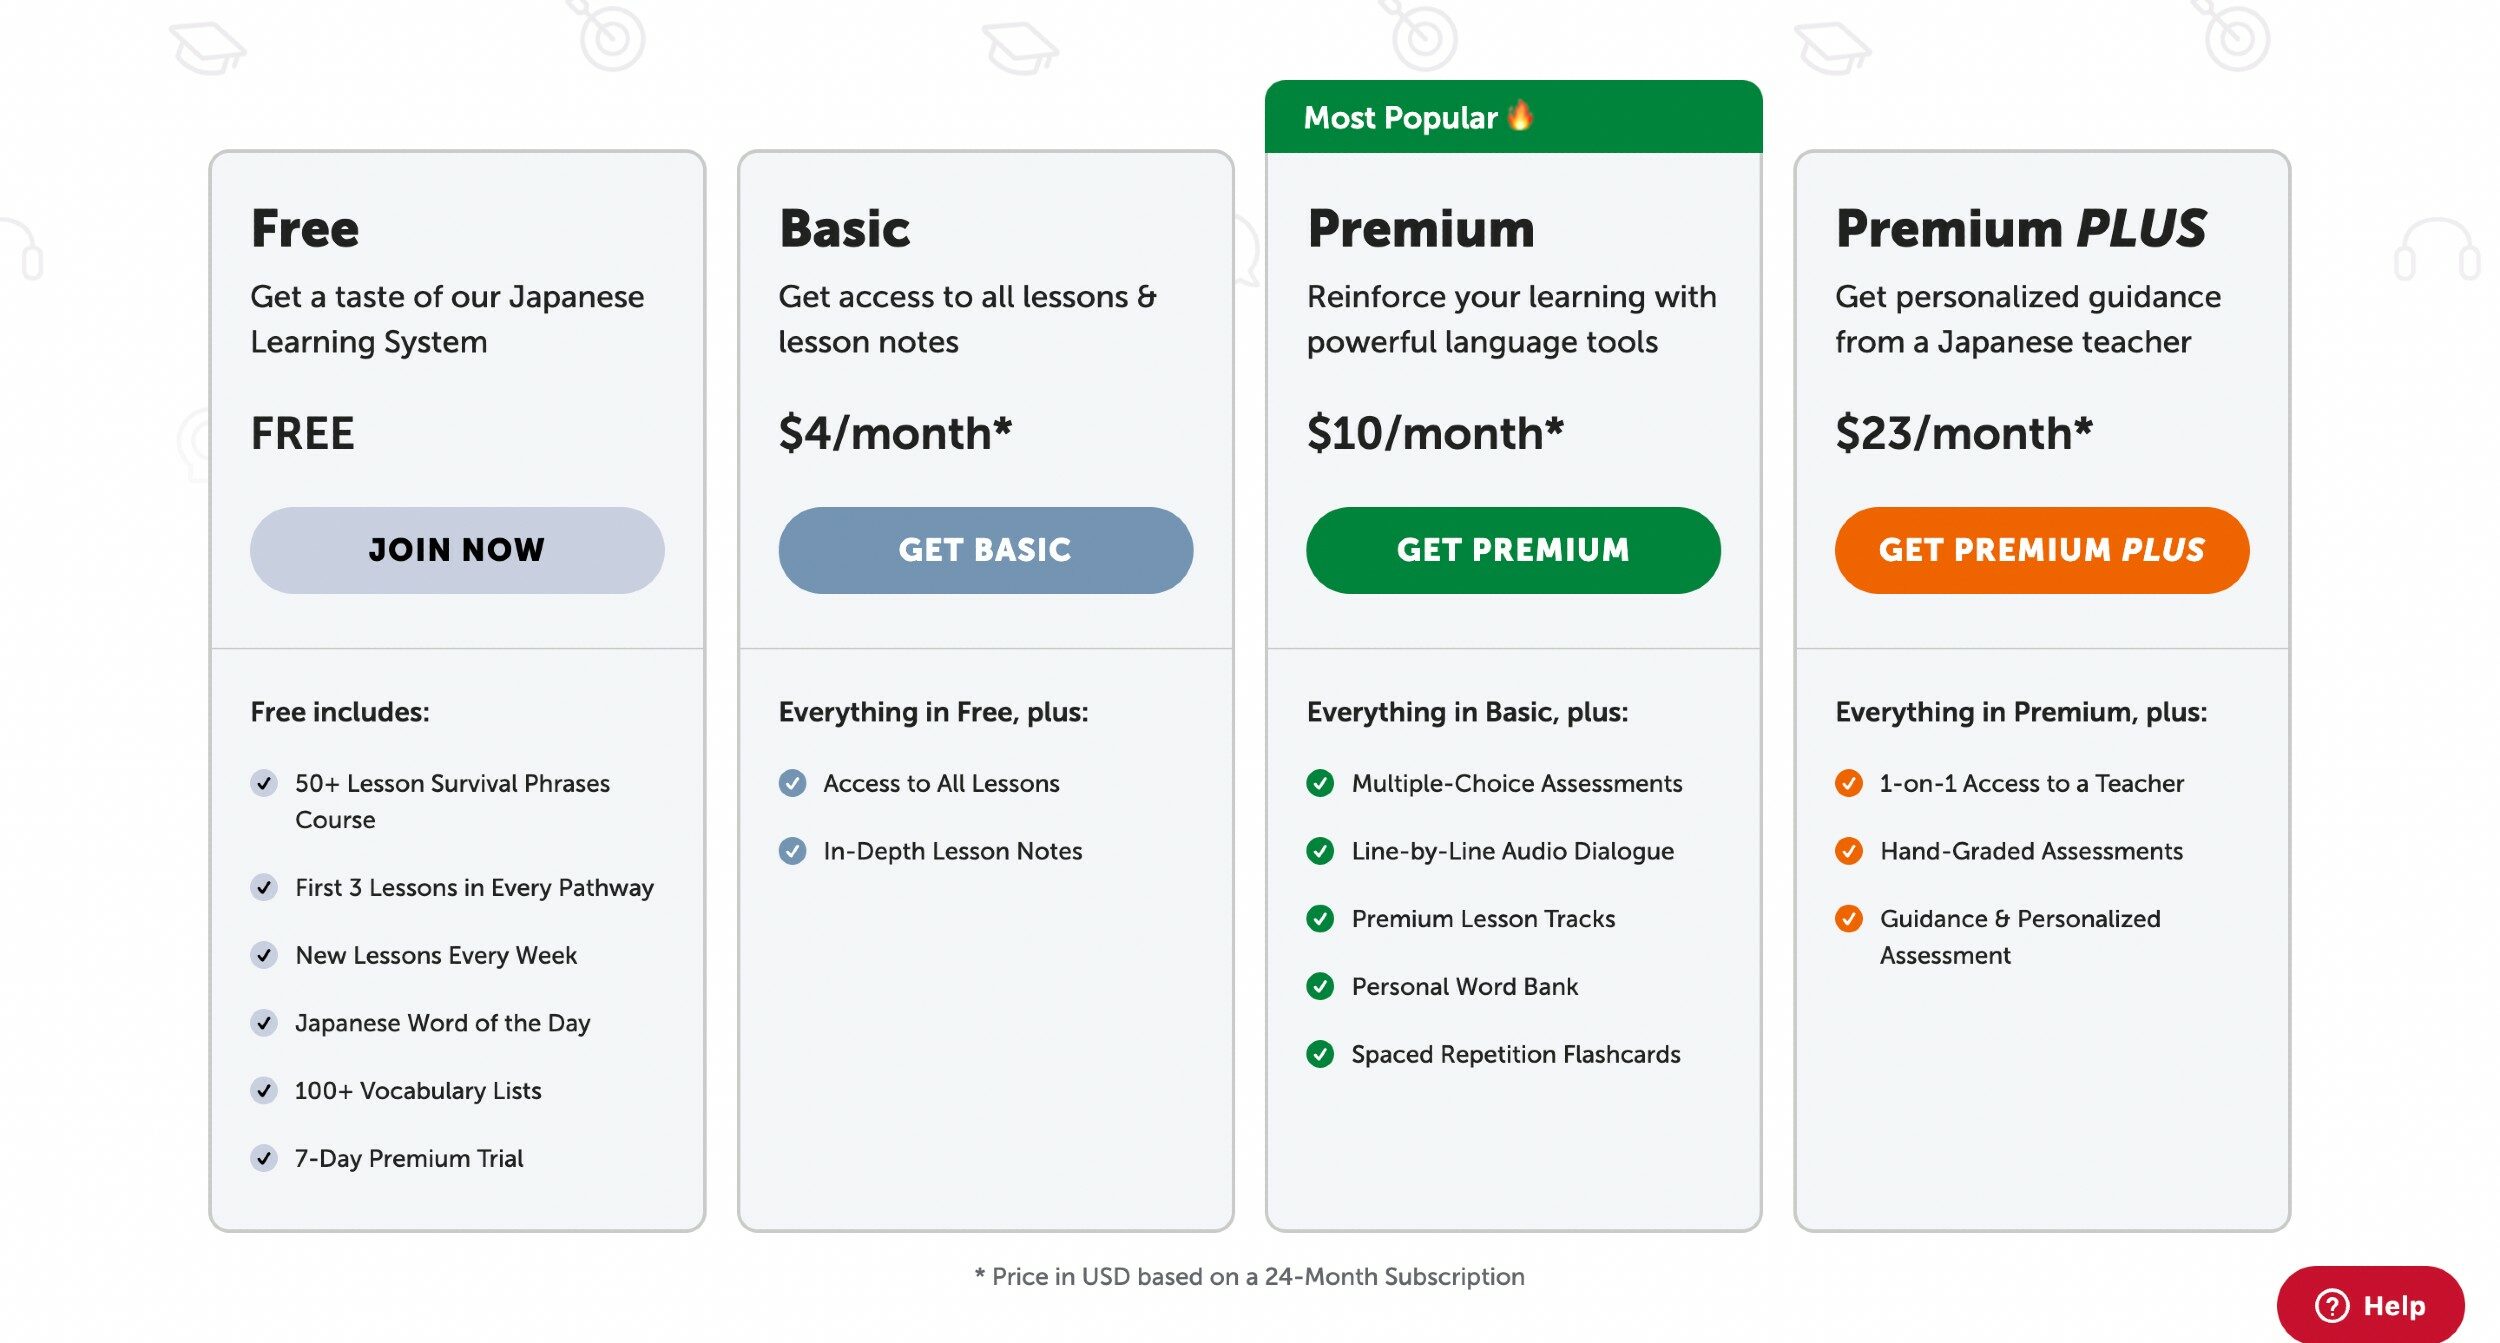 An image of the JapanesePod101 pricing plans and features for the Free, Basic, Premium and Premium Plus plans